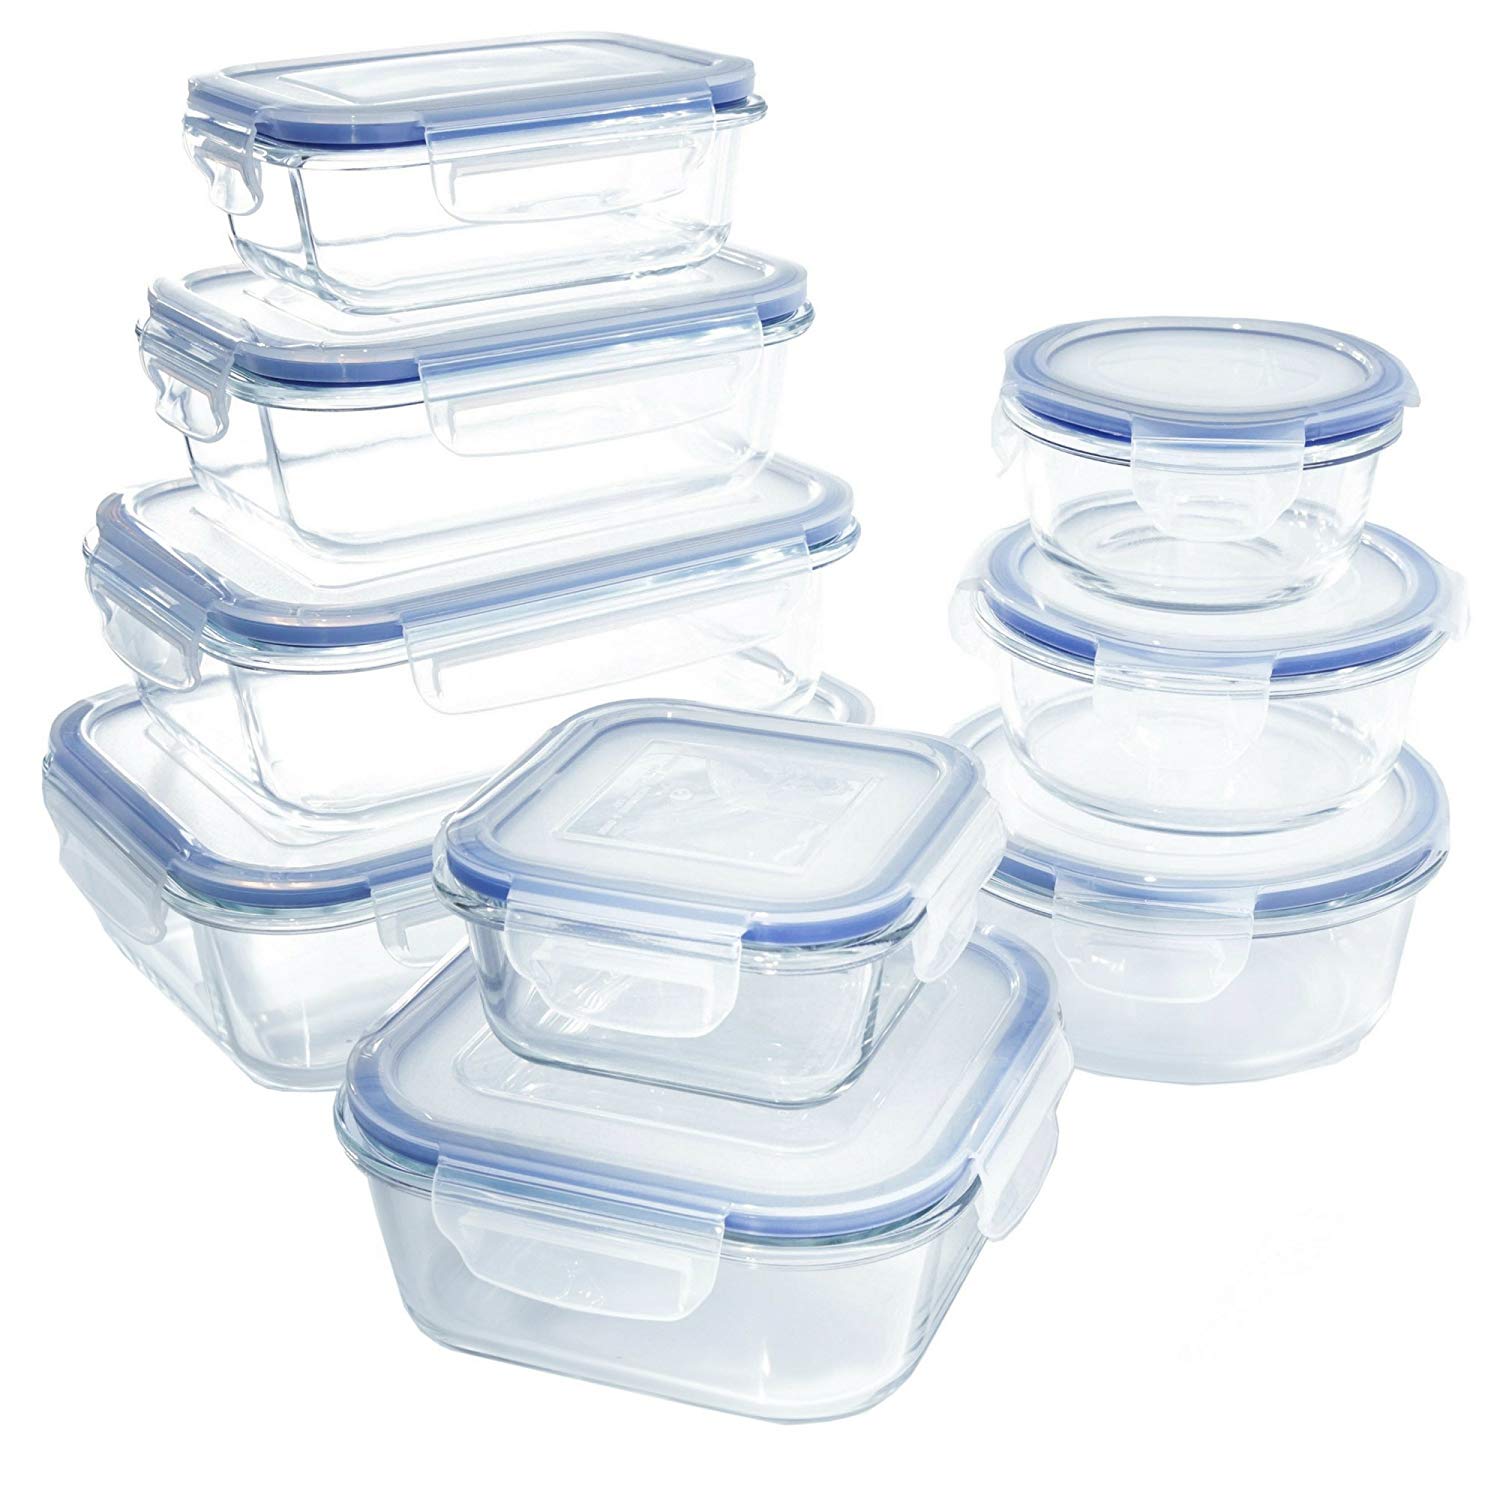 The Product Hatchery Glass Food Storage Container Set